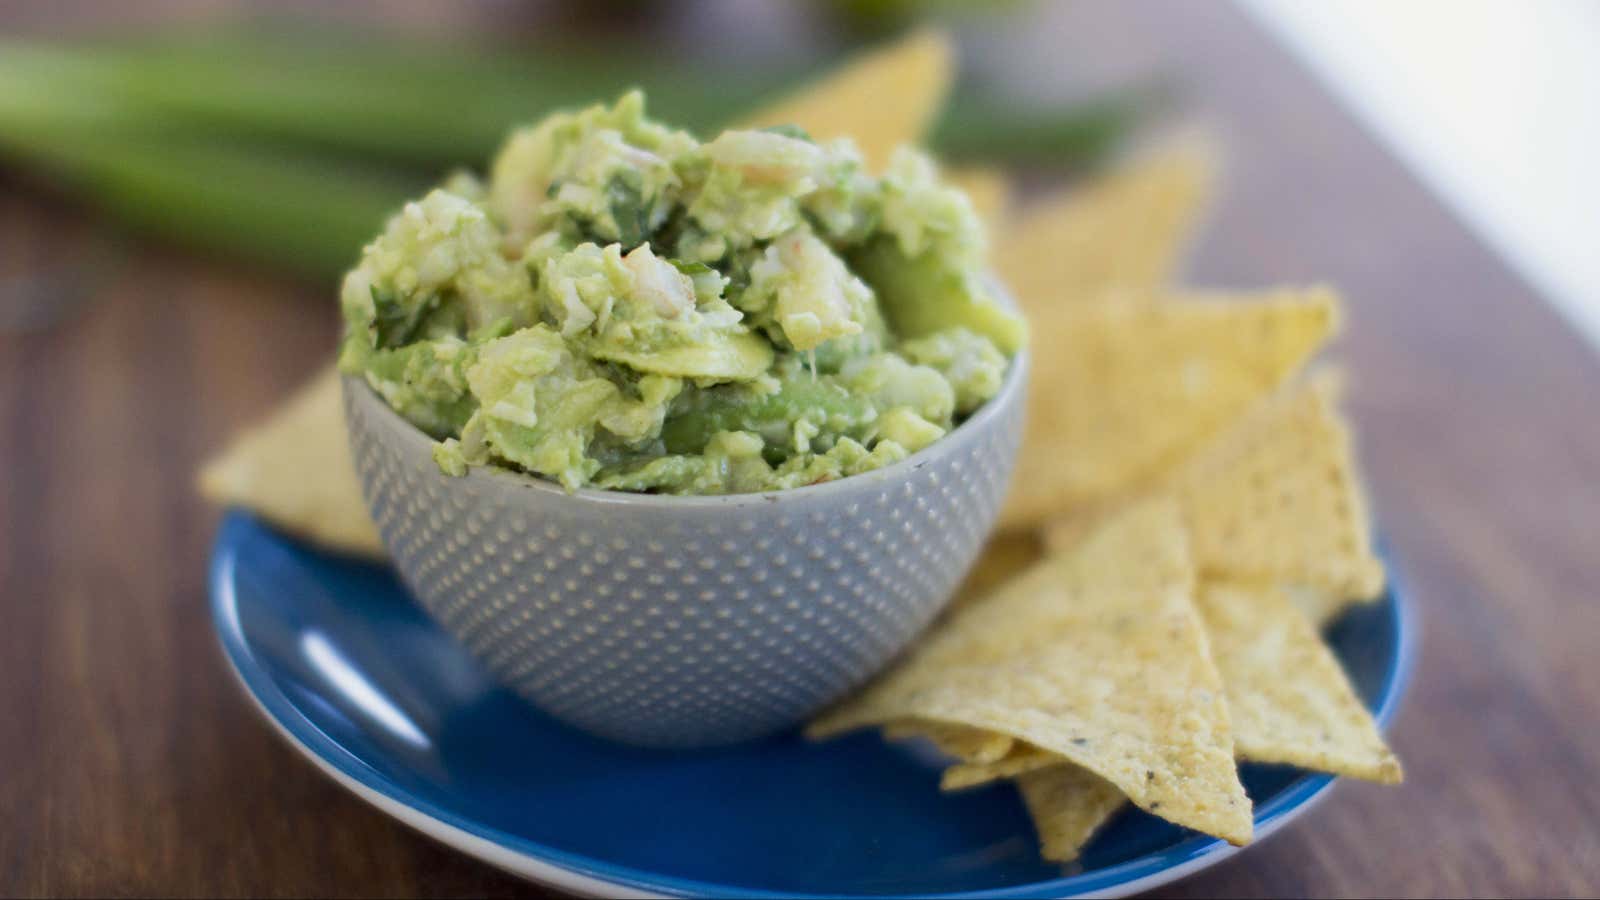 Would you like to add some guac?